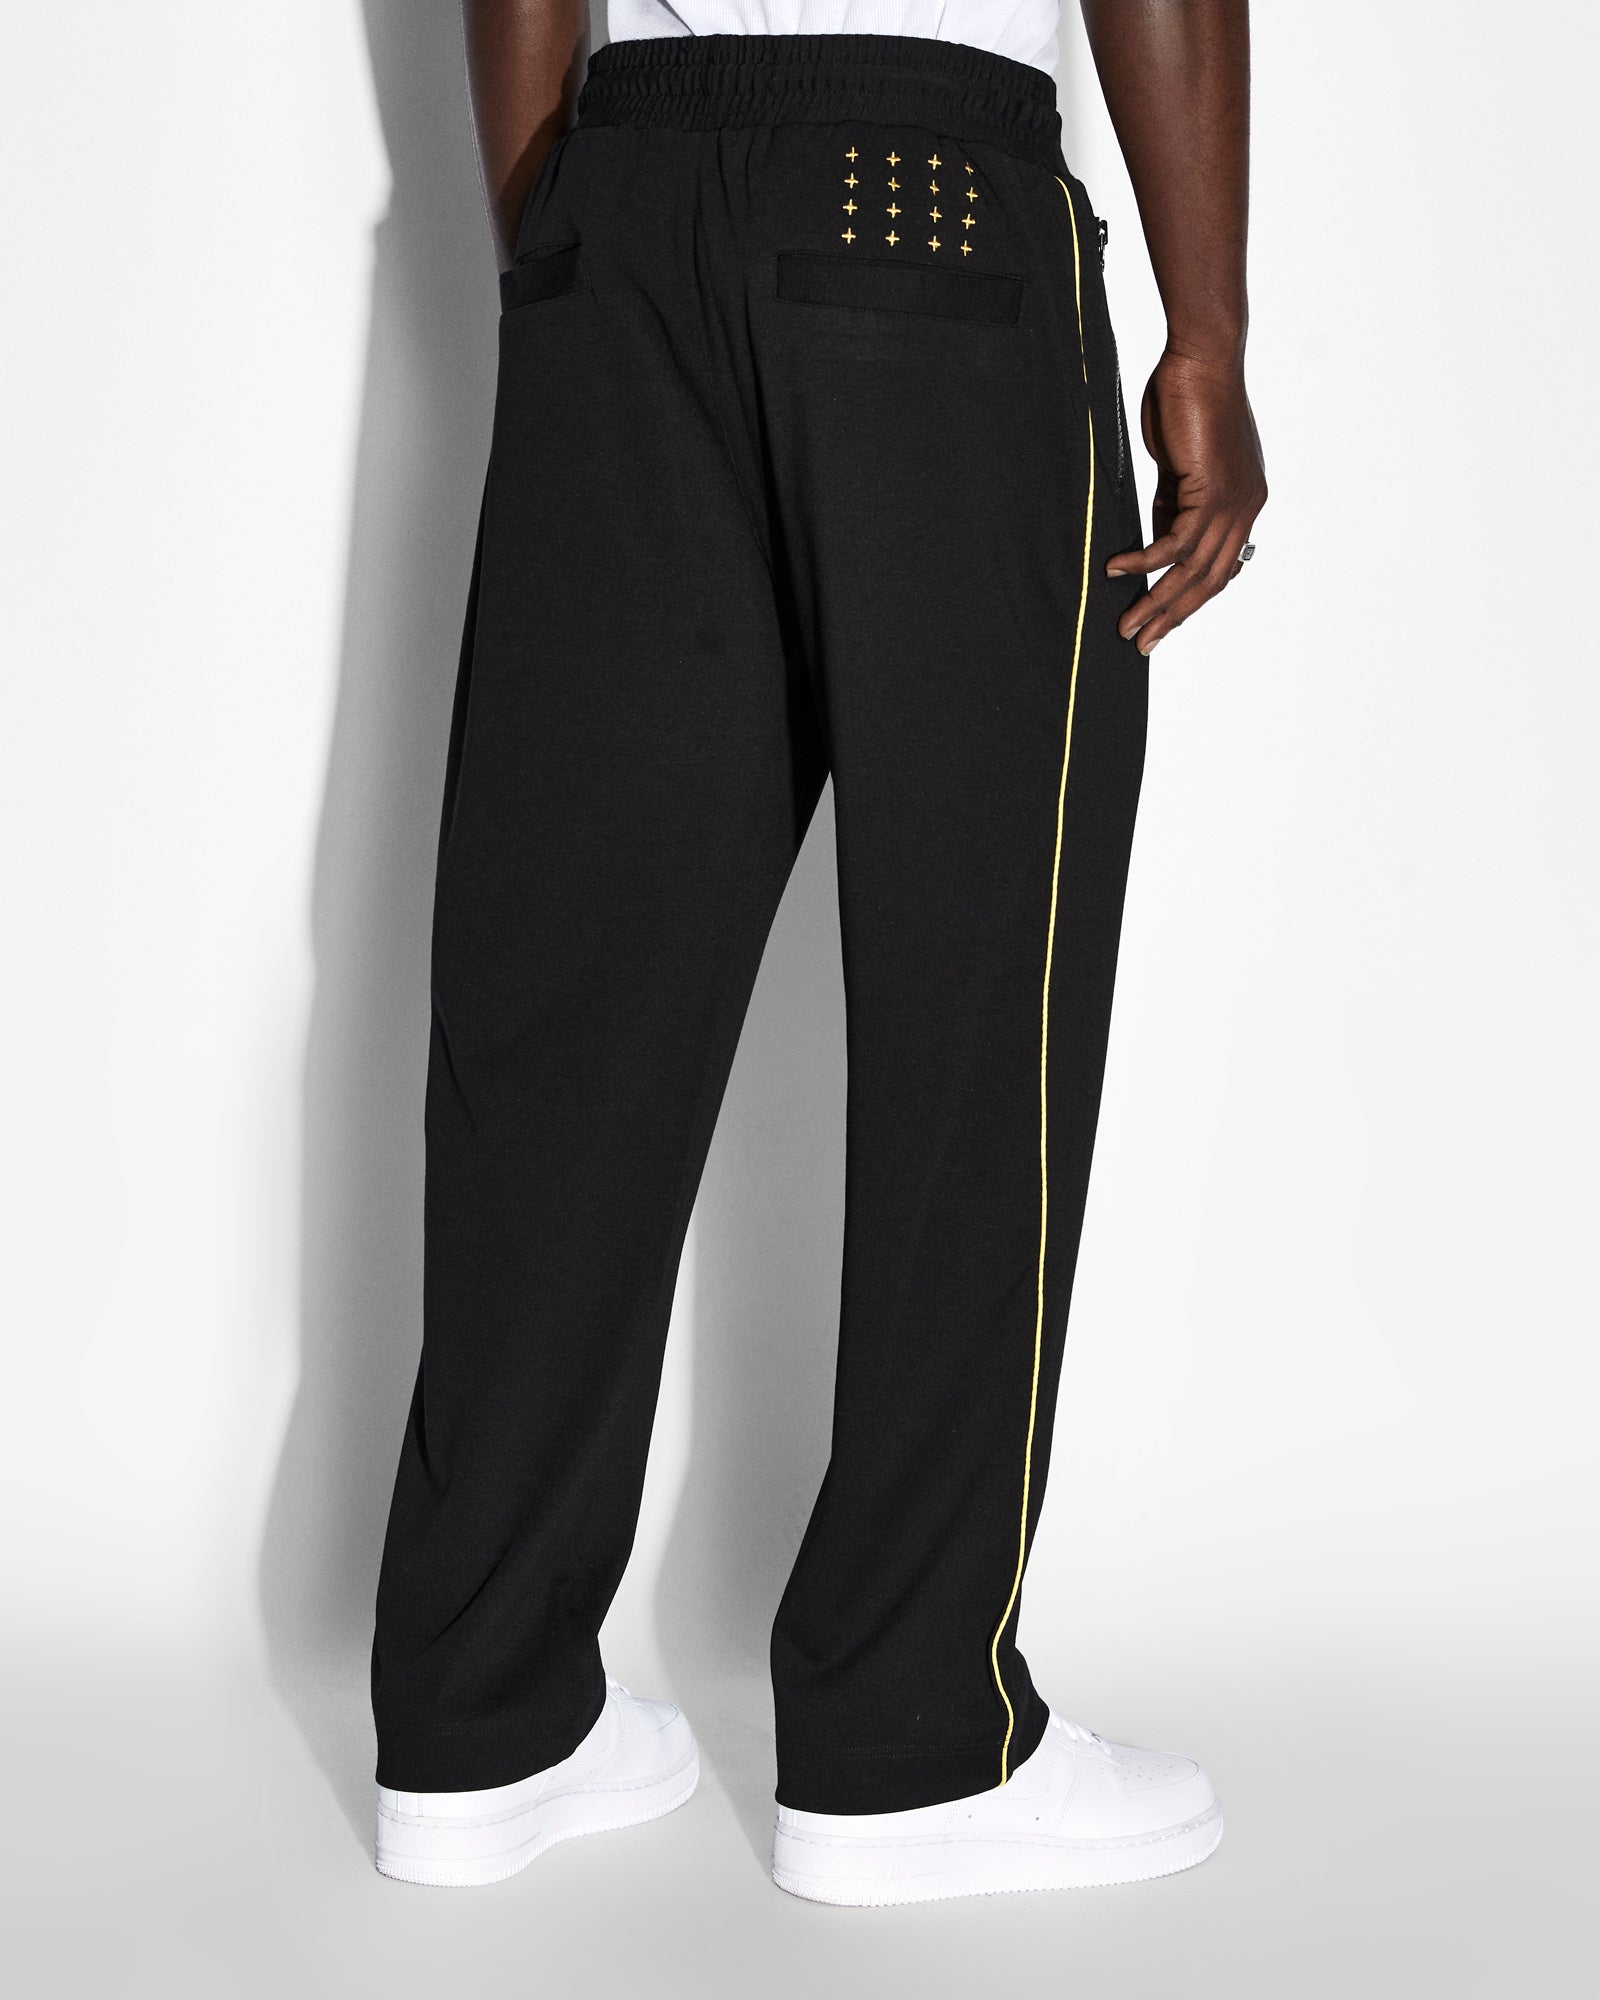 SYNTHESIS PANT BLACK YELLOW